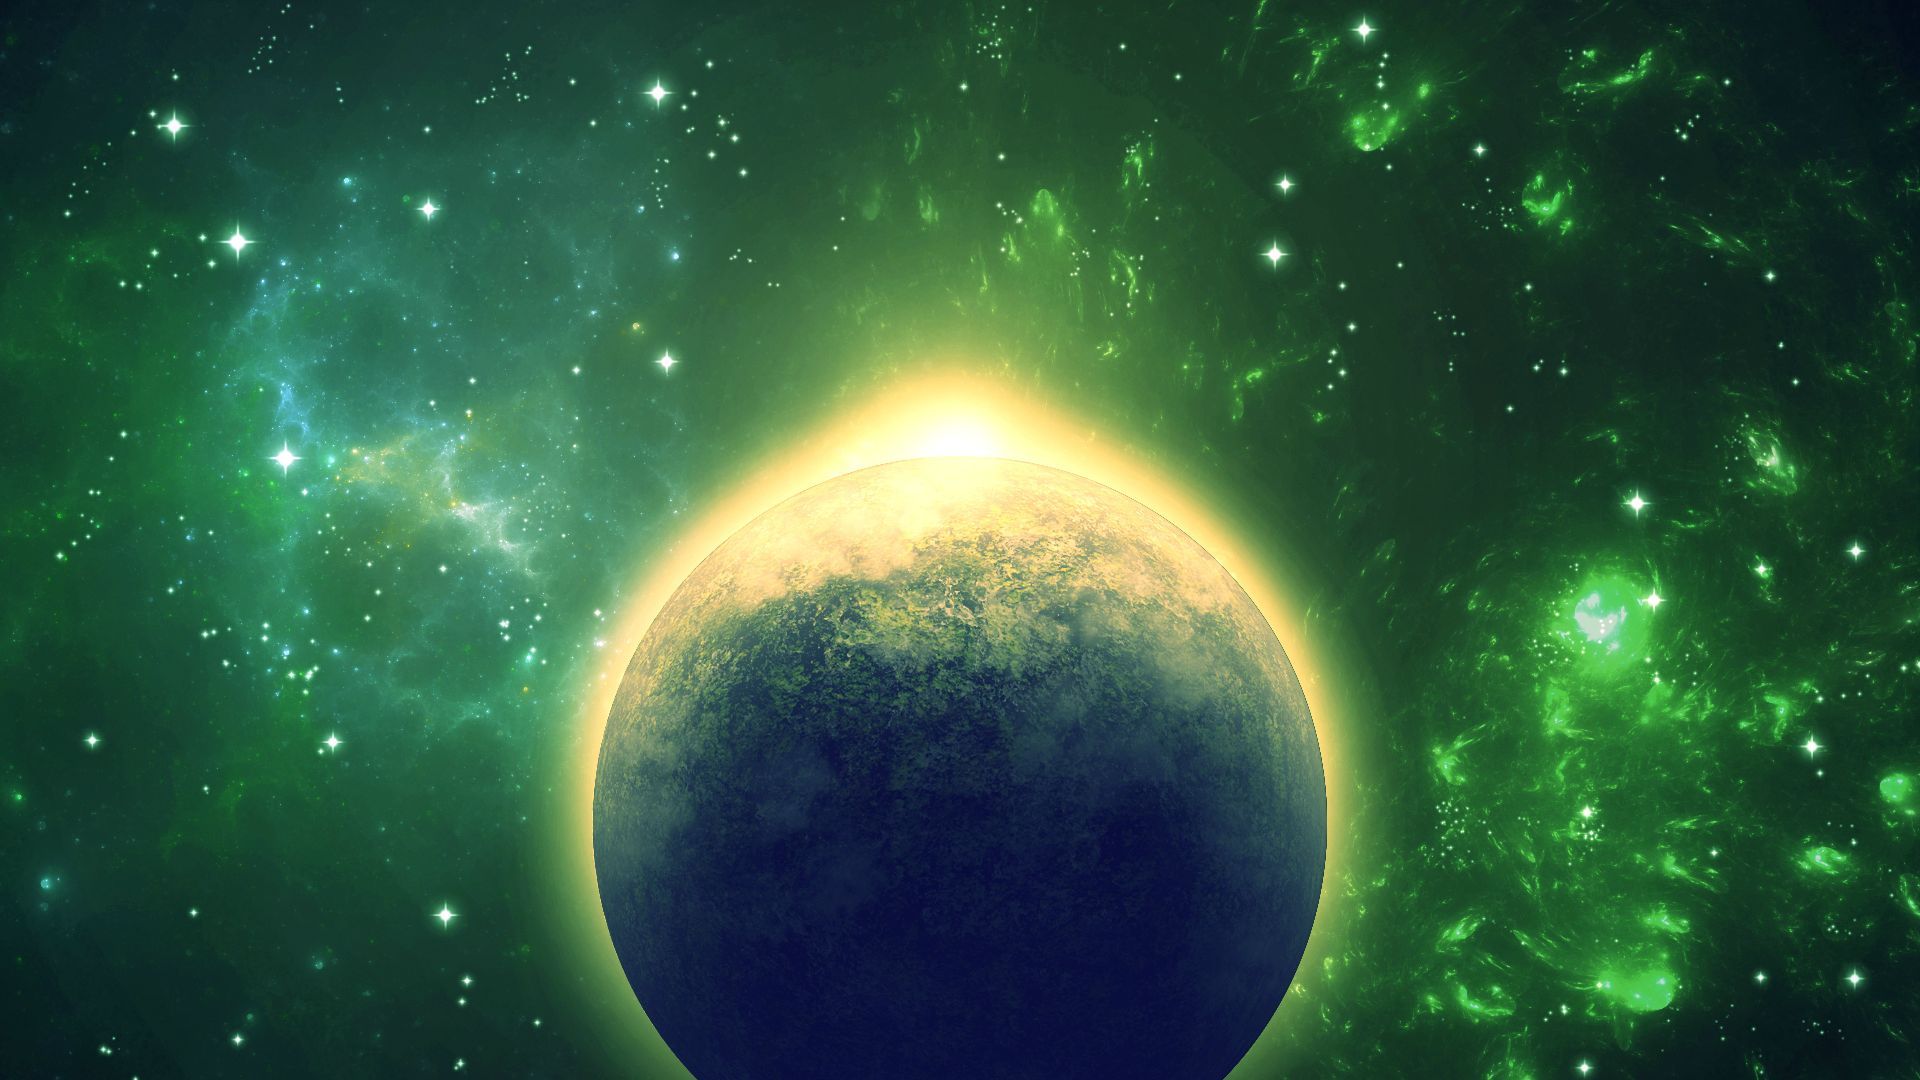 HD Cosmic wallpaper for your mobile devices